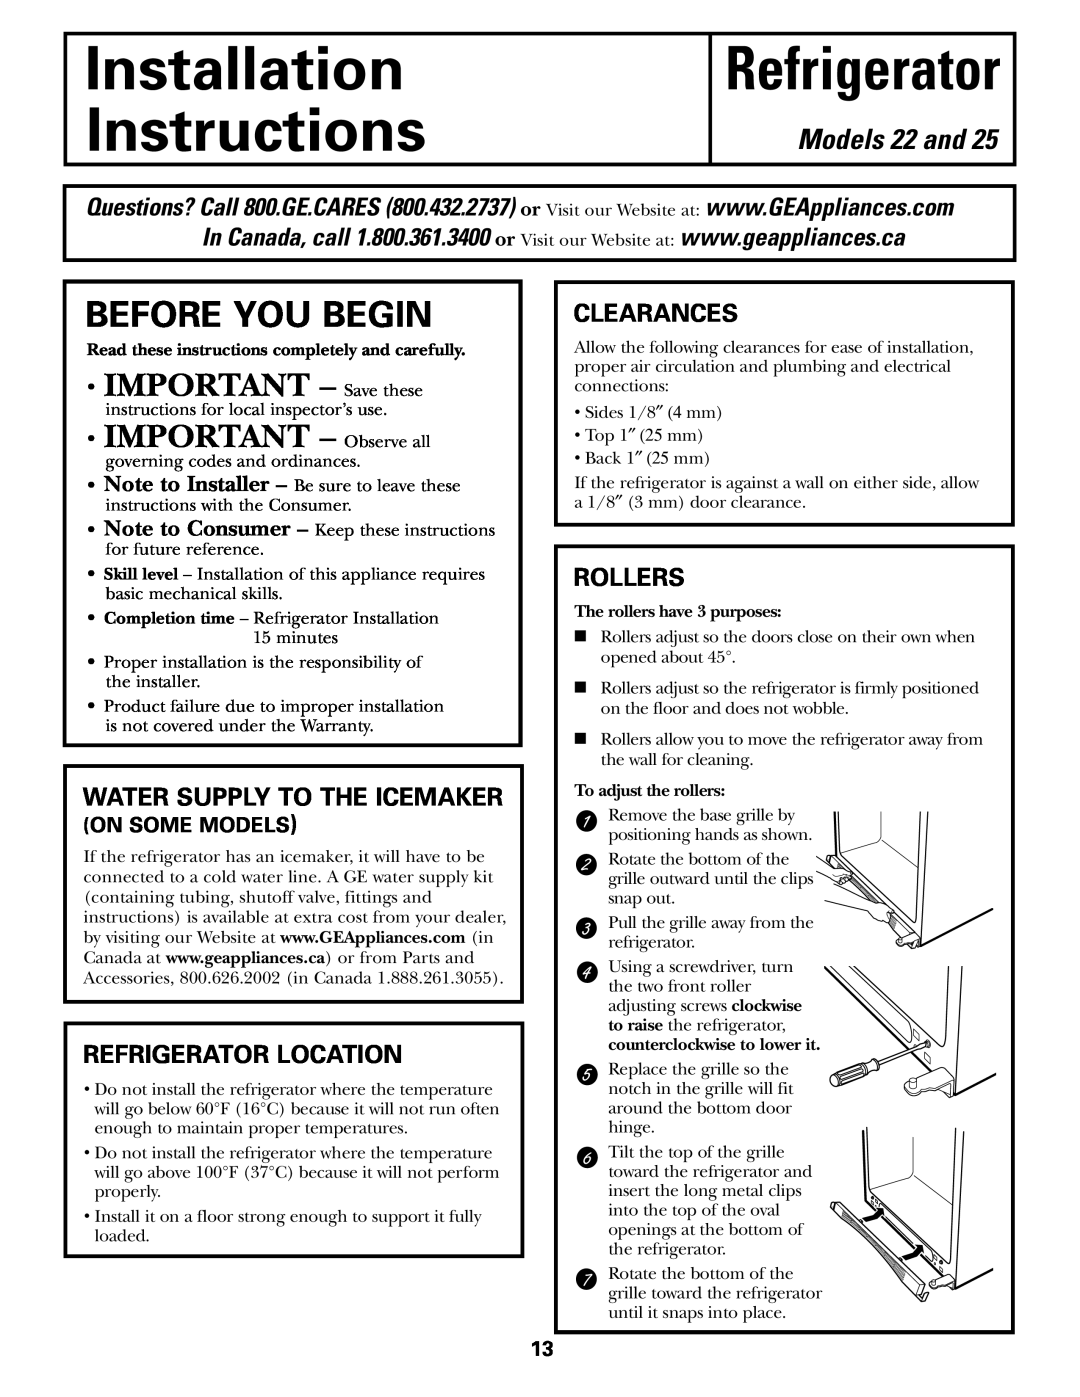 GE 200D2463P002 Installation Instructions, Before You Begin, Models 22 and, Refrigerator Location, Clearances, Rollers 